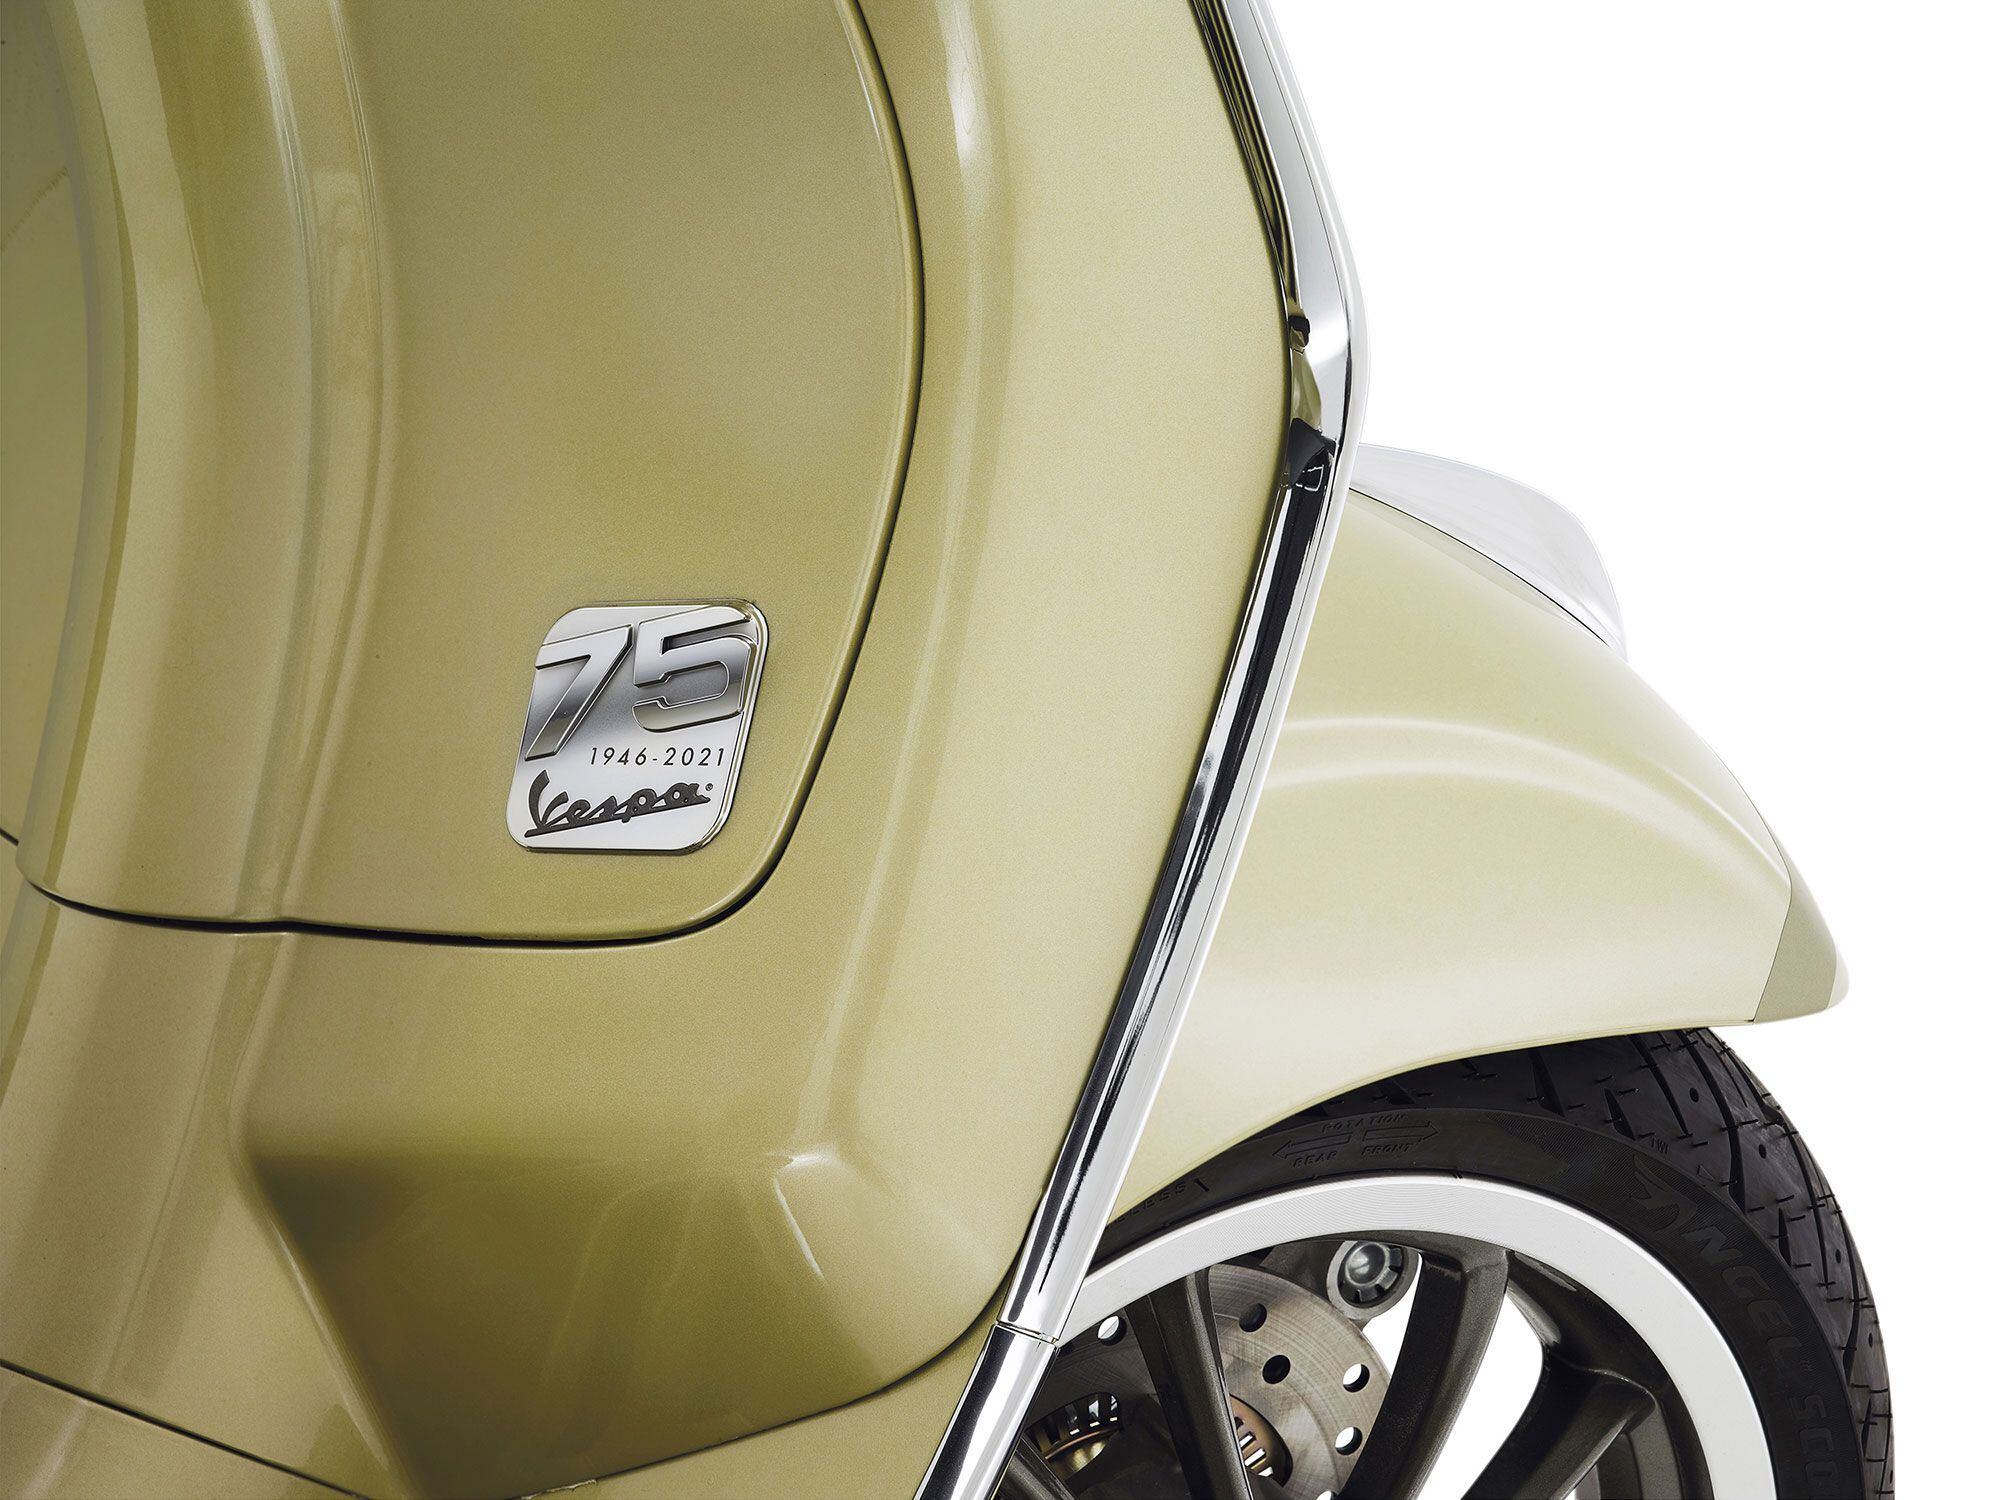 Special badging is just one of the additional touches on the 75th Anniversary Edition Vespa models.